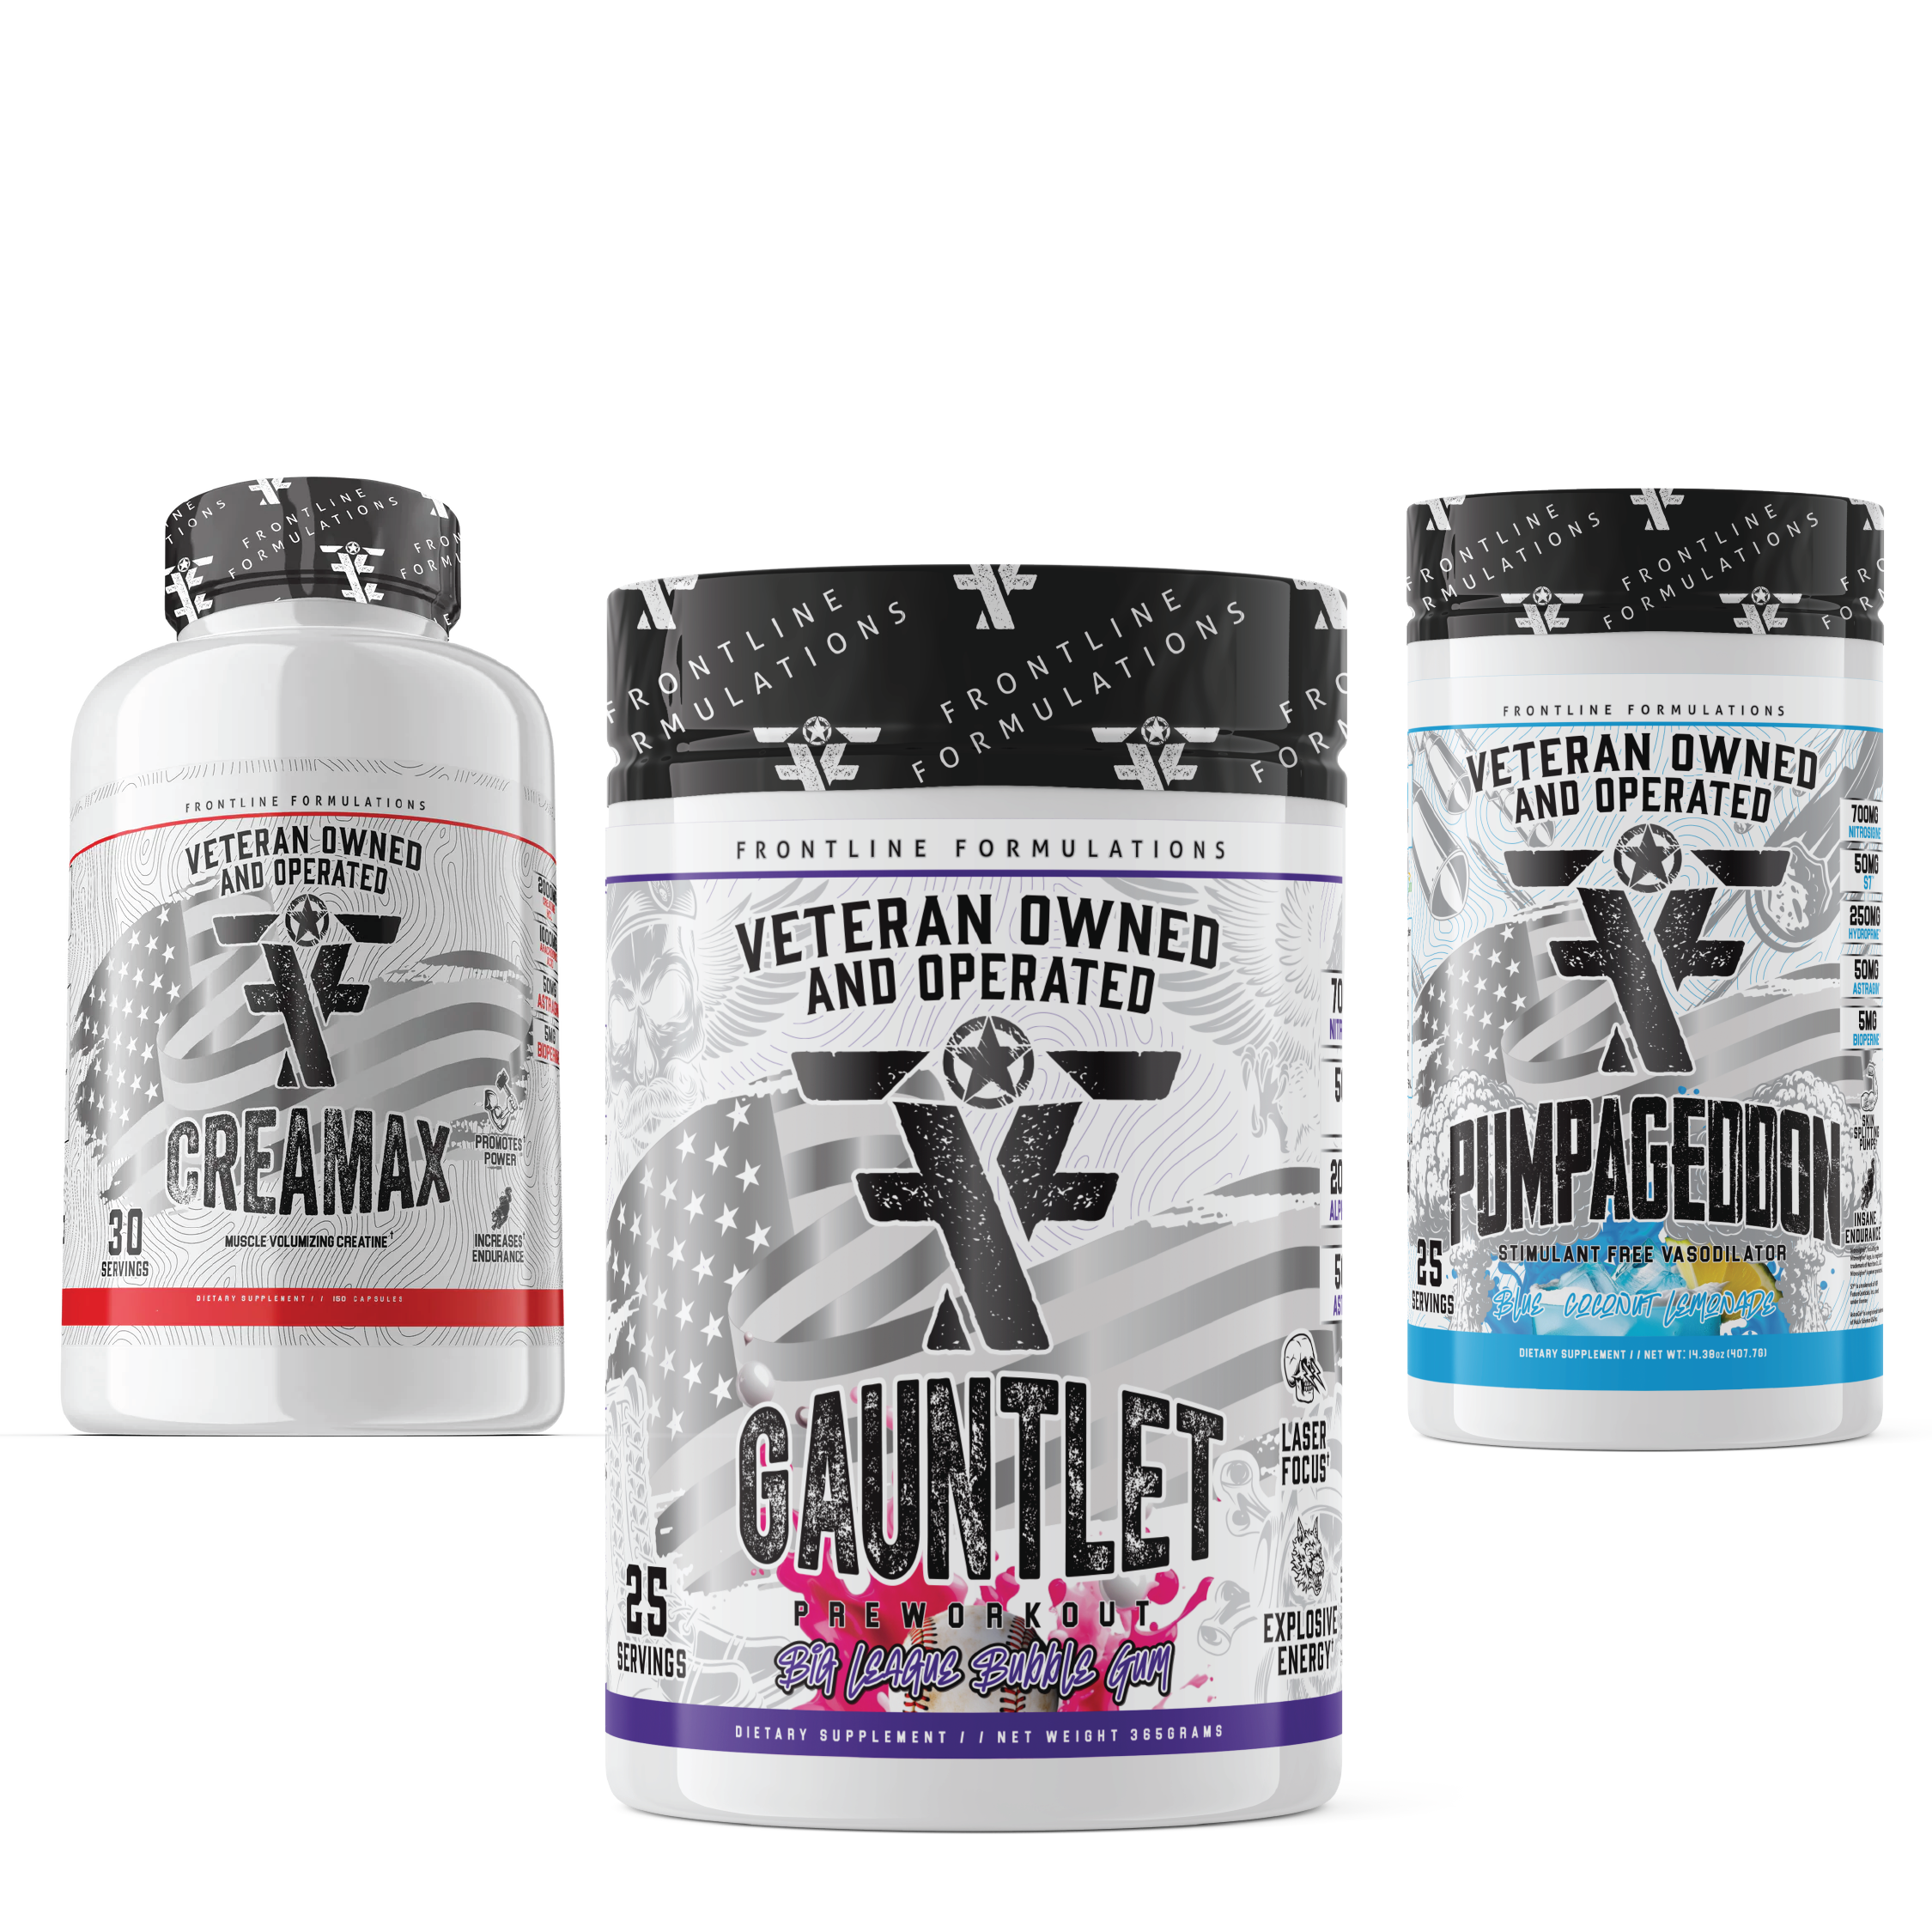 Gauntlet Pumpageddon Creamax Stack Gauntlet Gauntlet is quickly becoming one of the most sought-after mid-stim pres on the market! Boasting 275mg of caffeine combined with 50mg of astragin for almost instant absorption! 300mg of L-Theanine to prevent jitt